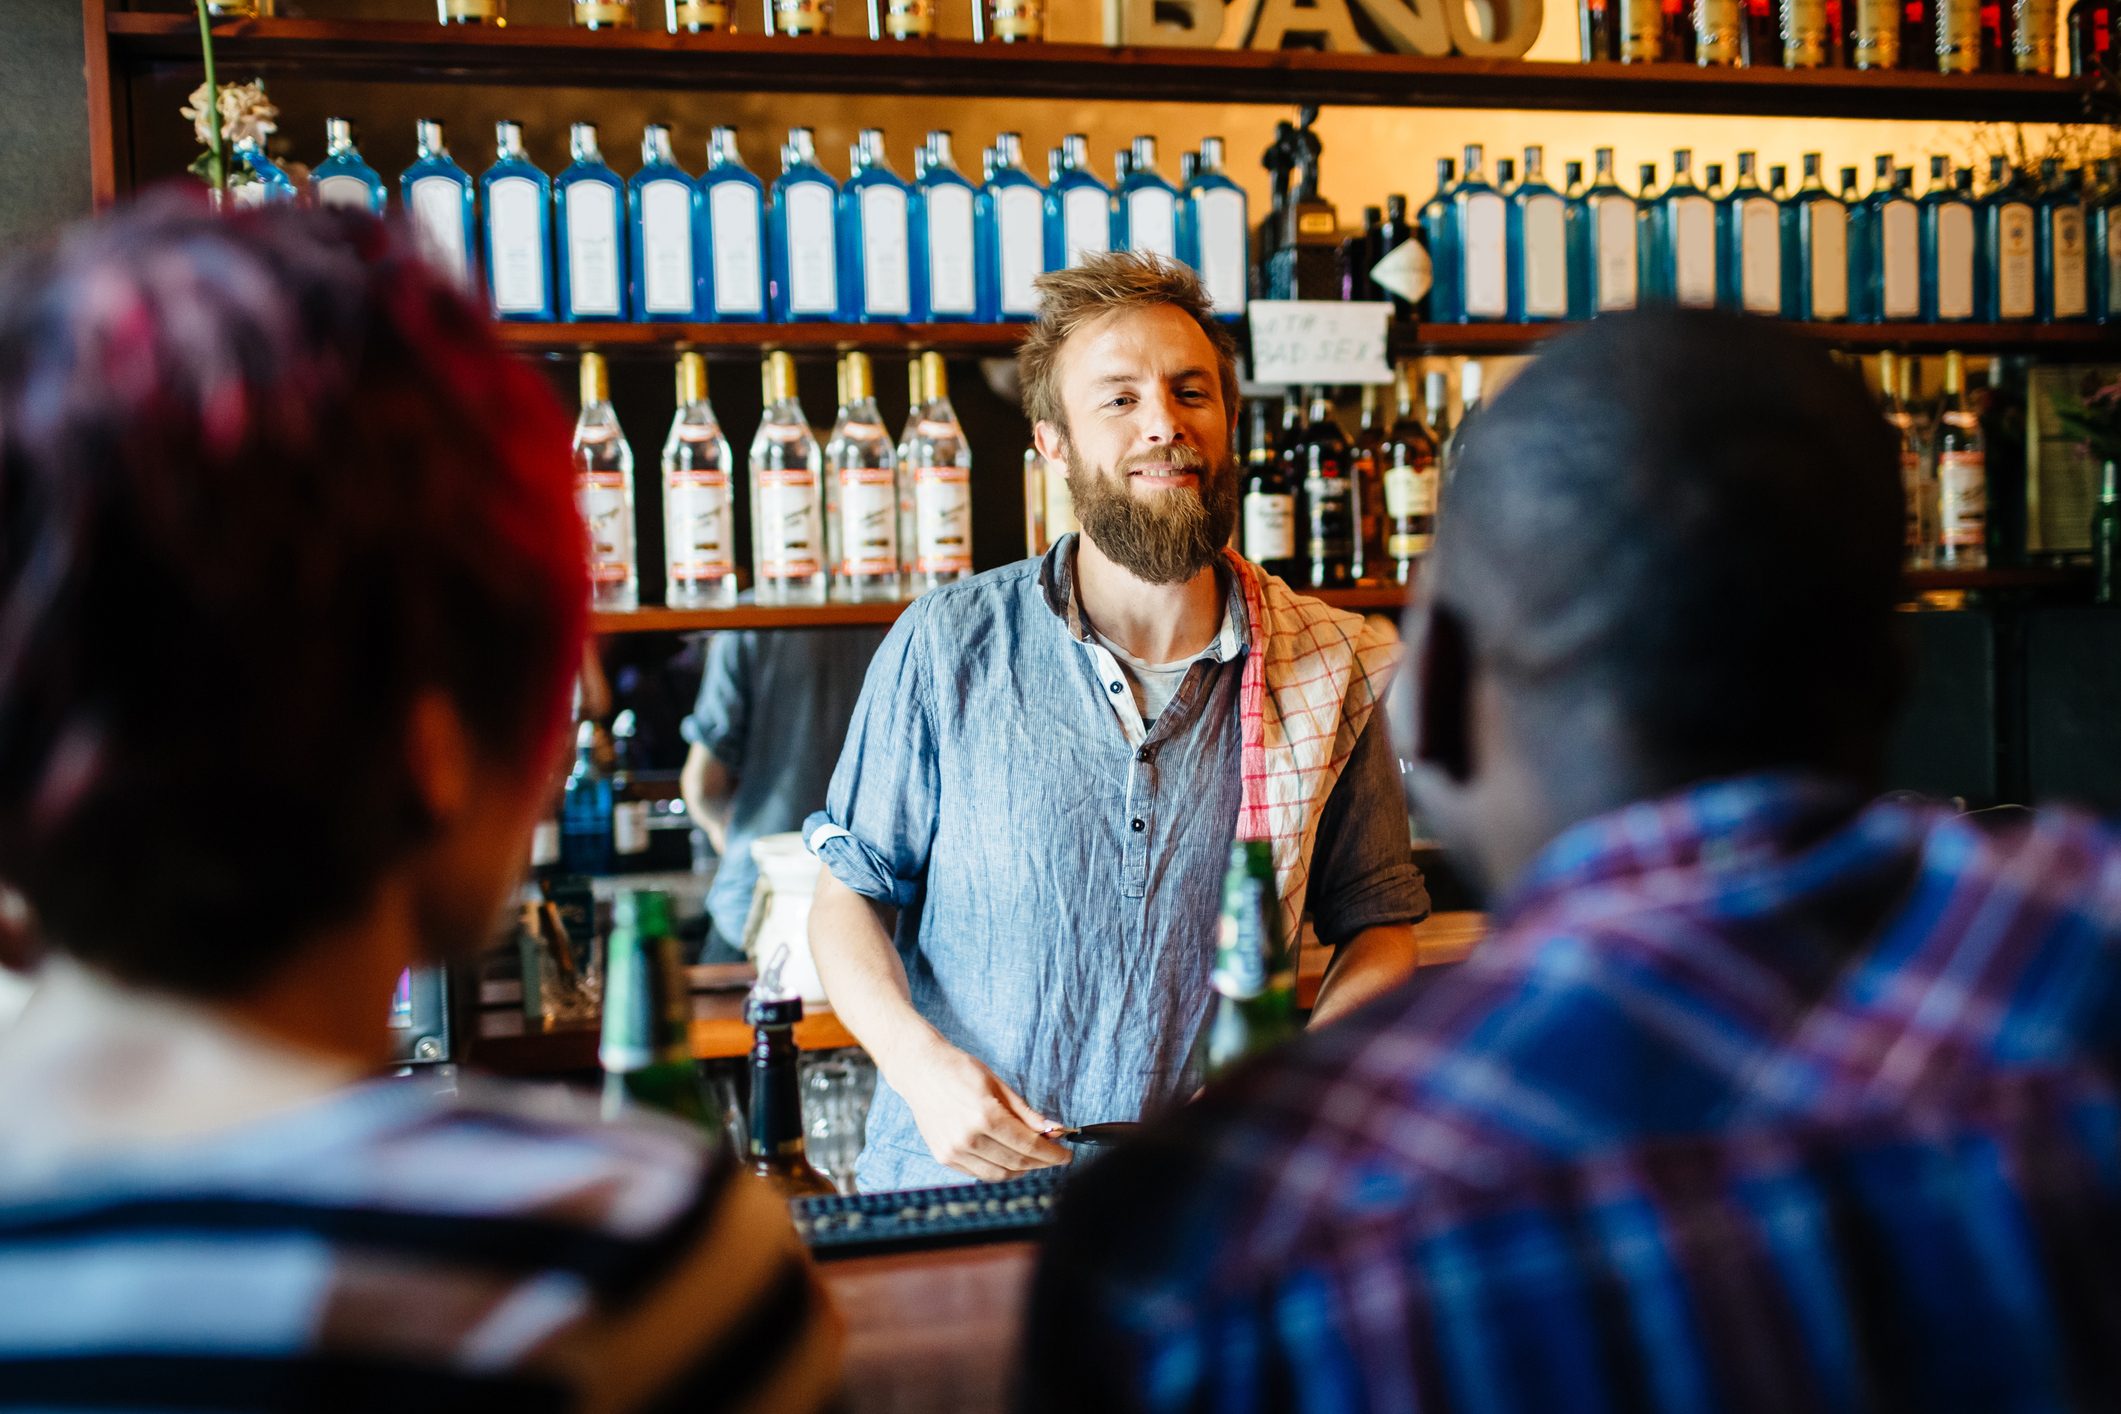 How to Handle Getting a Bad Drink, According to a Bartender